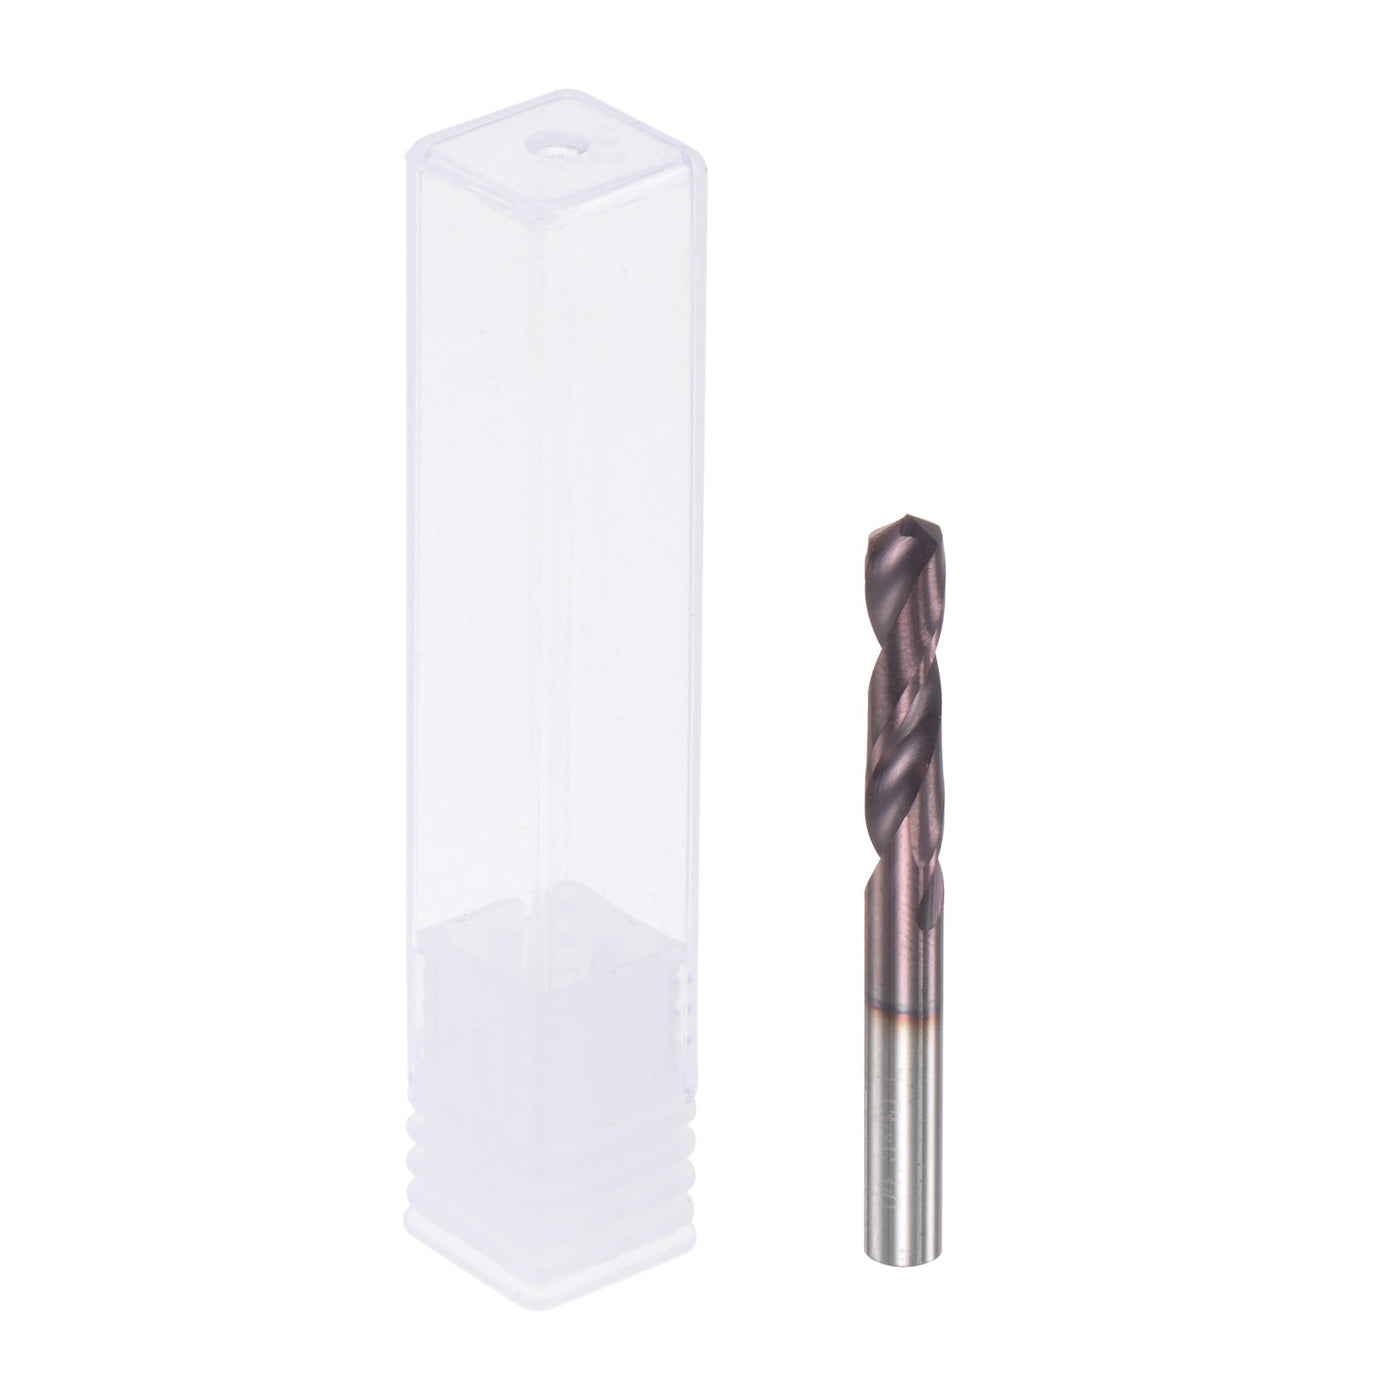 uxcell Uxcell 4.5mm DIN K45 Tungsten Carbide AlTiSin Coated Drill Bit for Stainless Steel